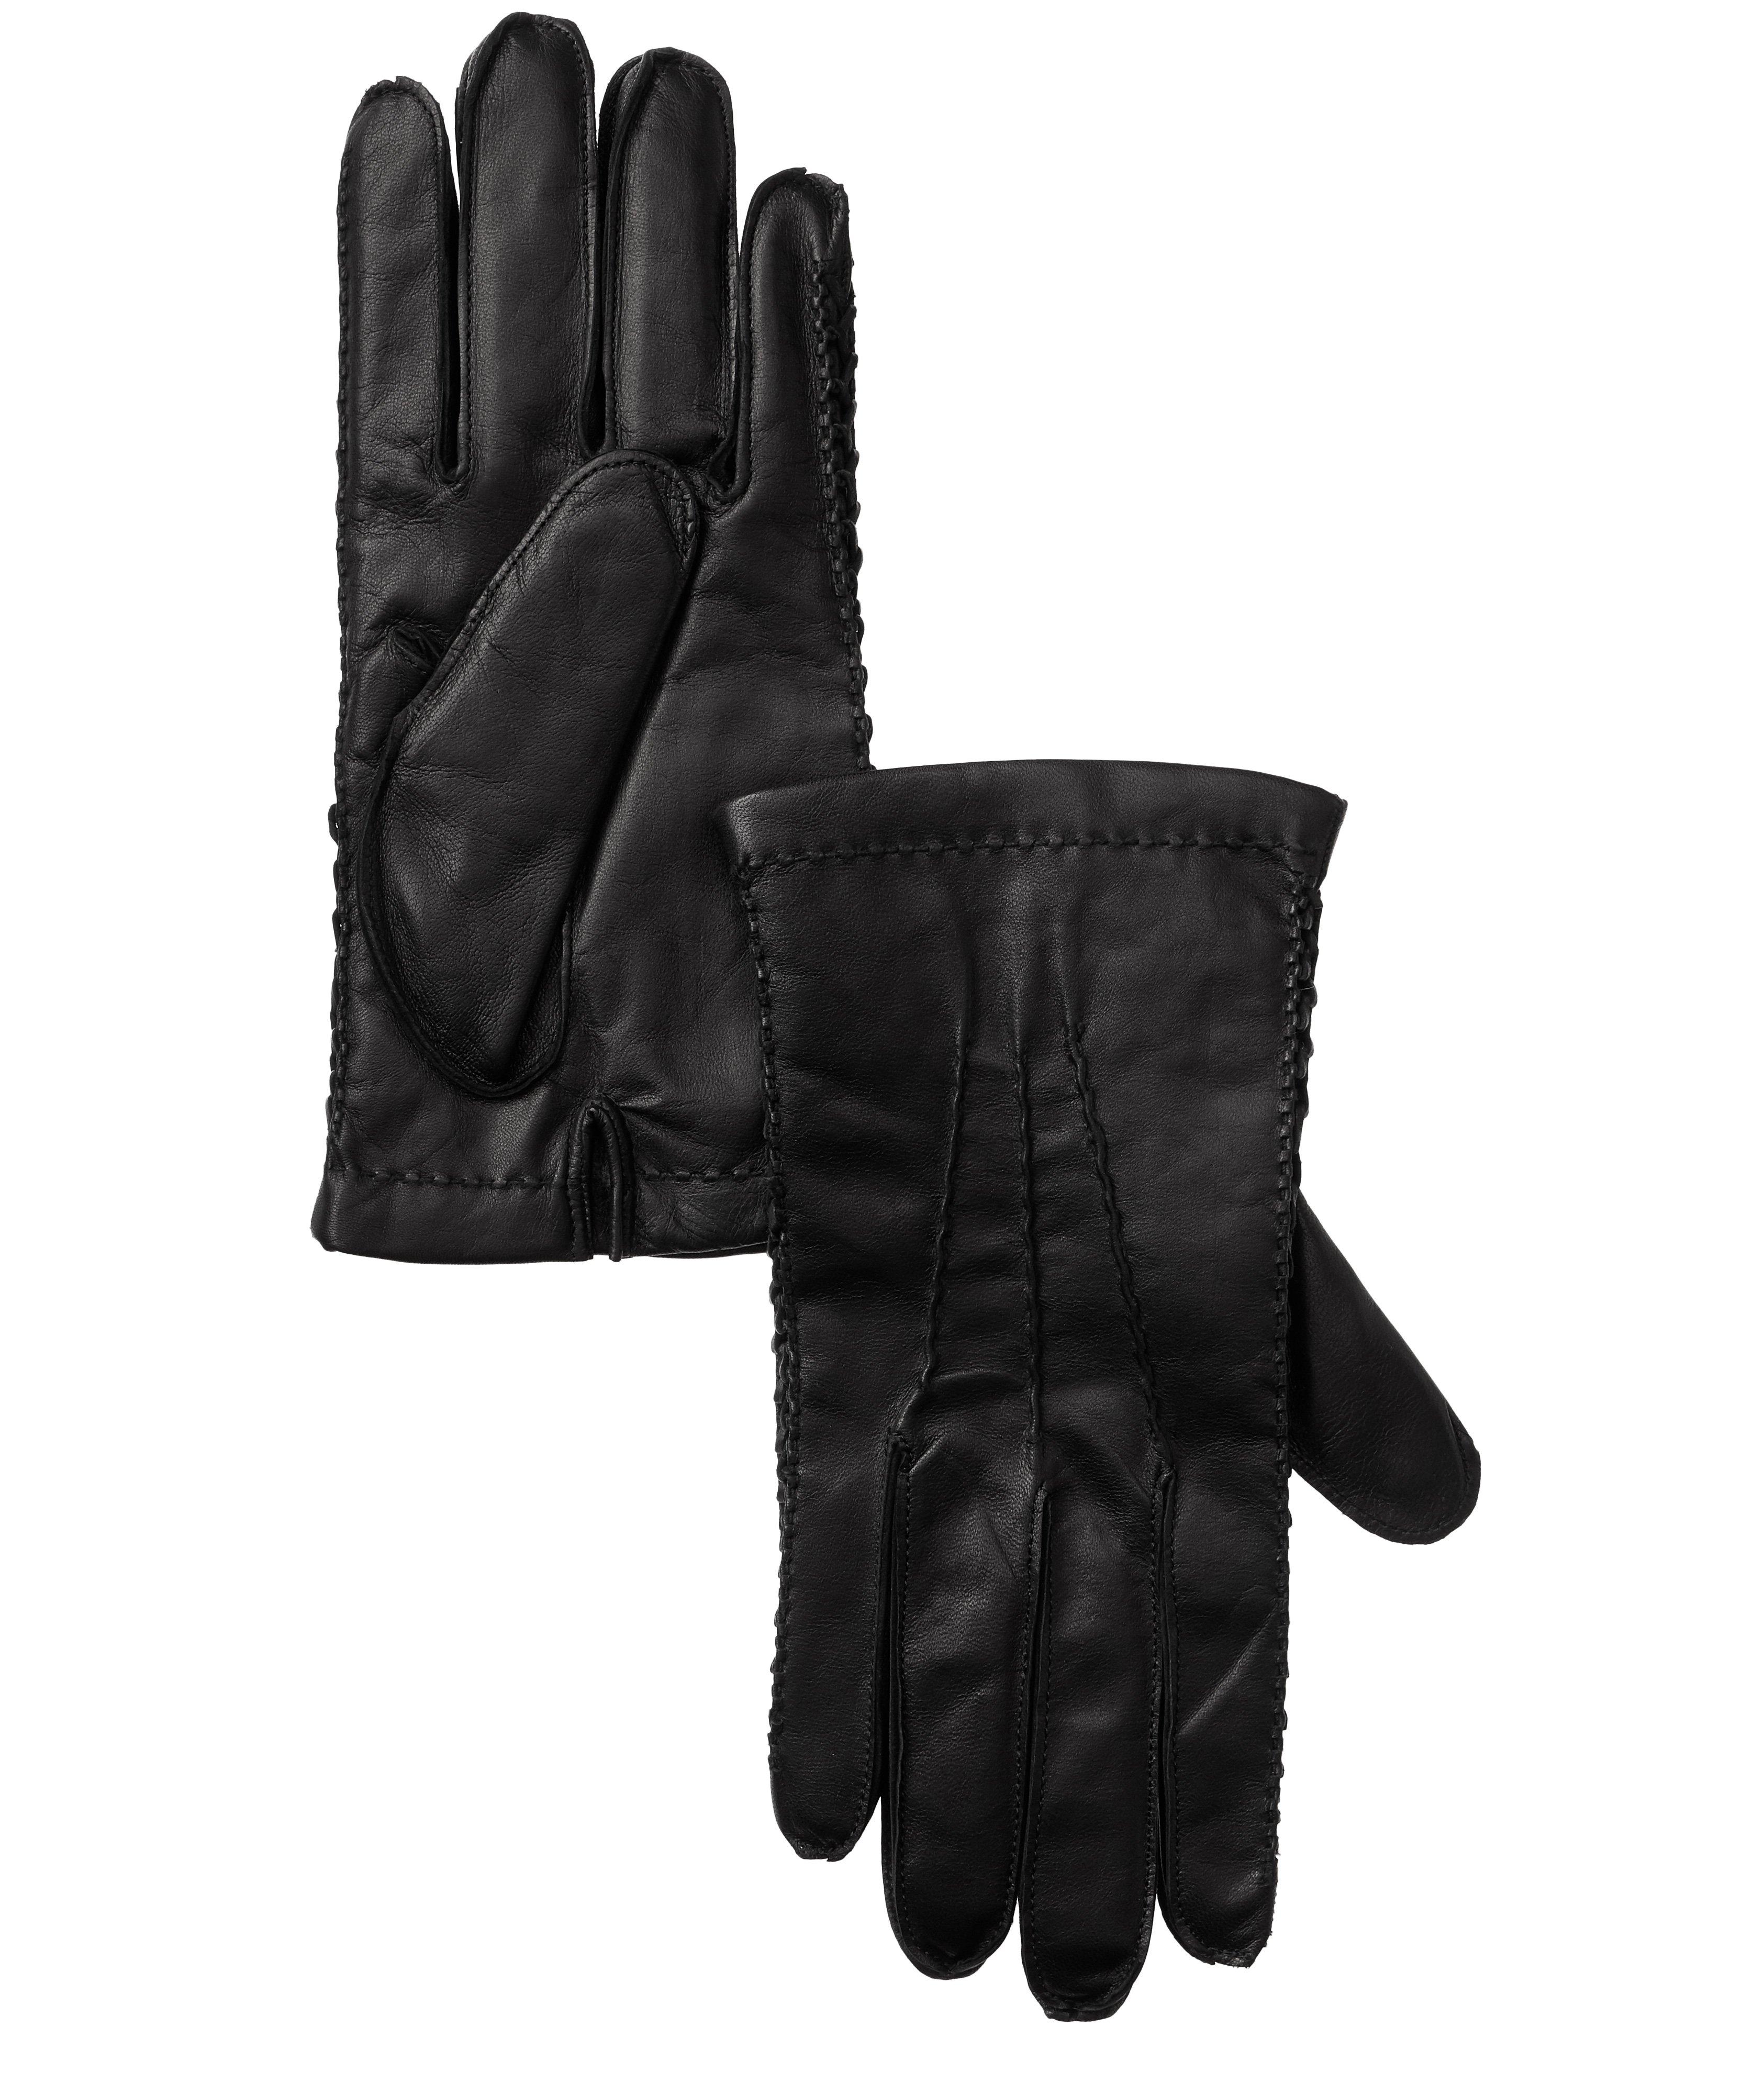 Leather Cashmere Driving Gloves image 0